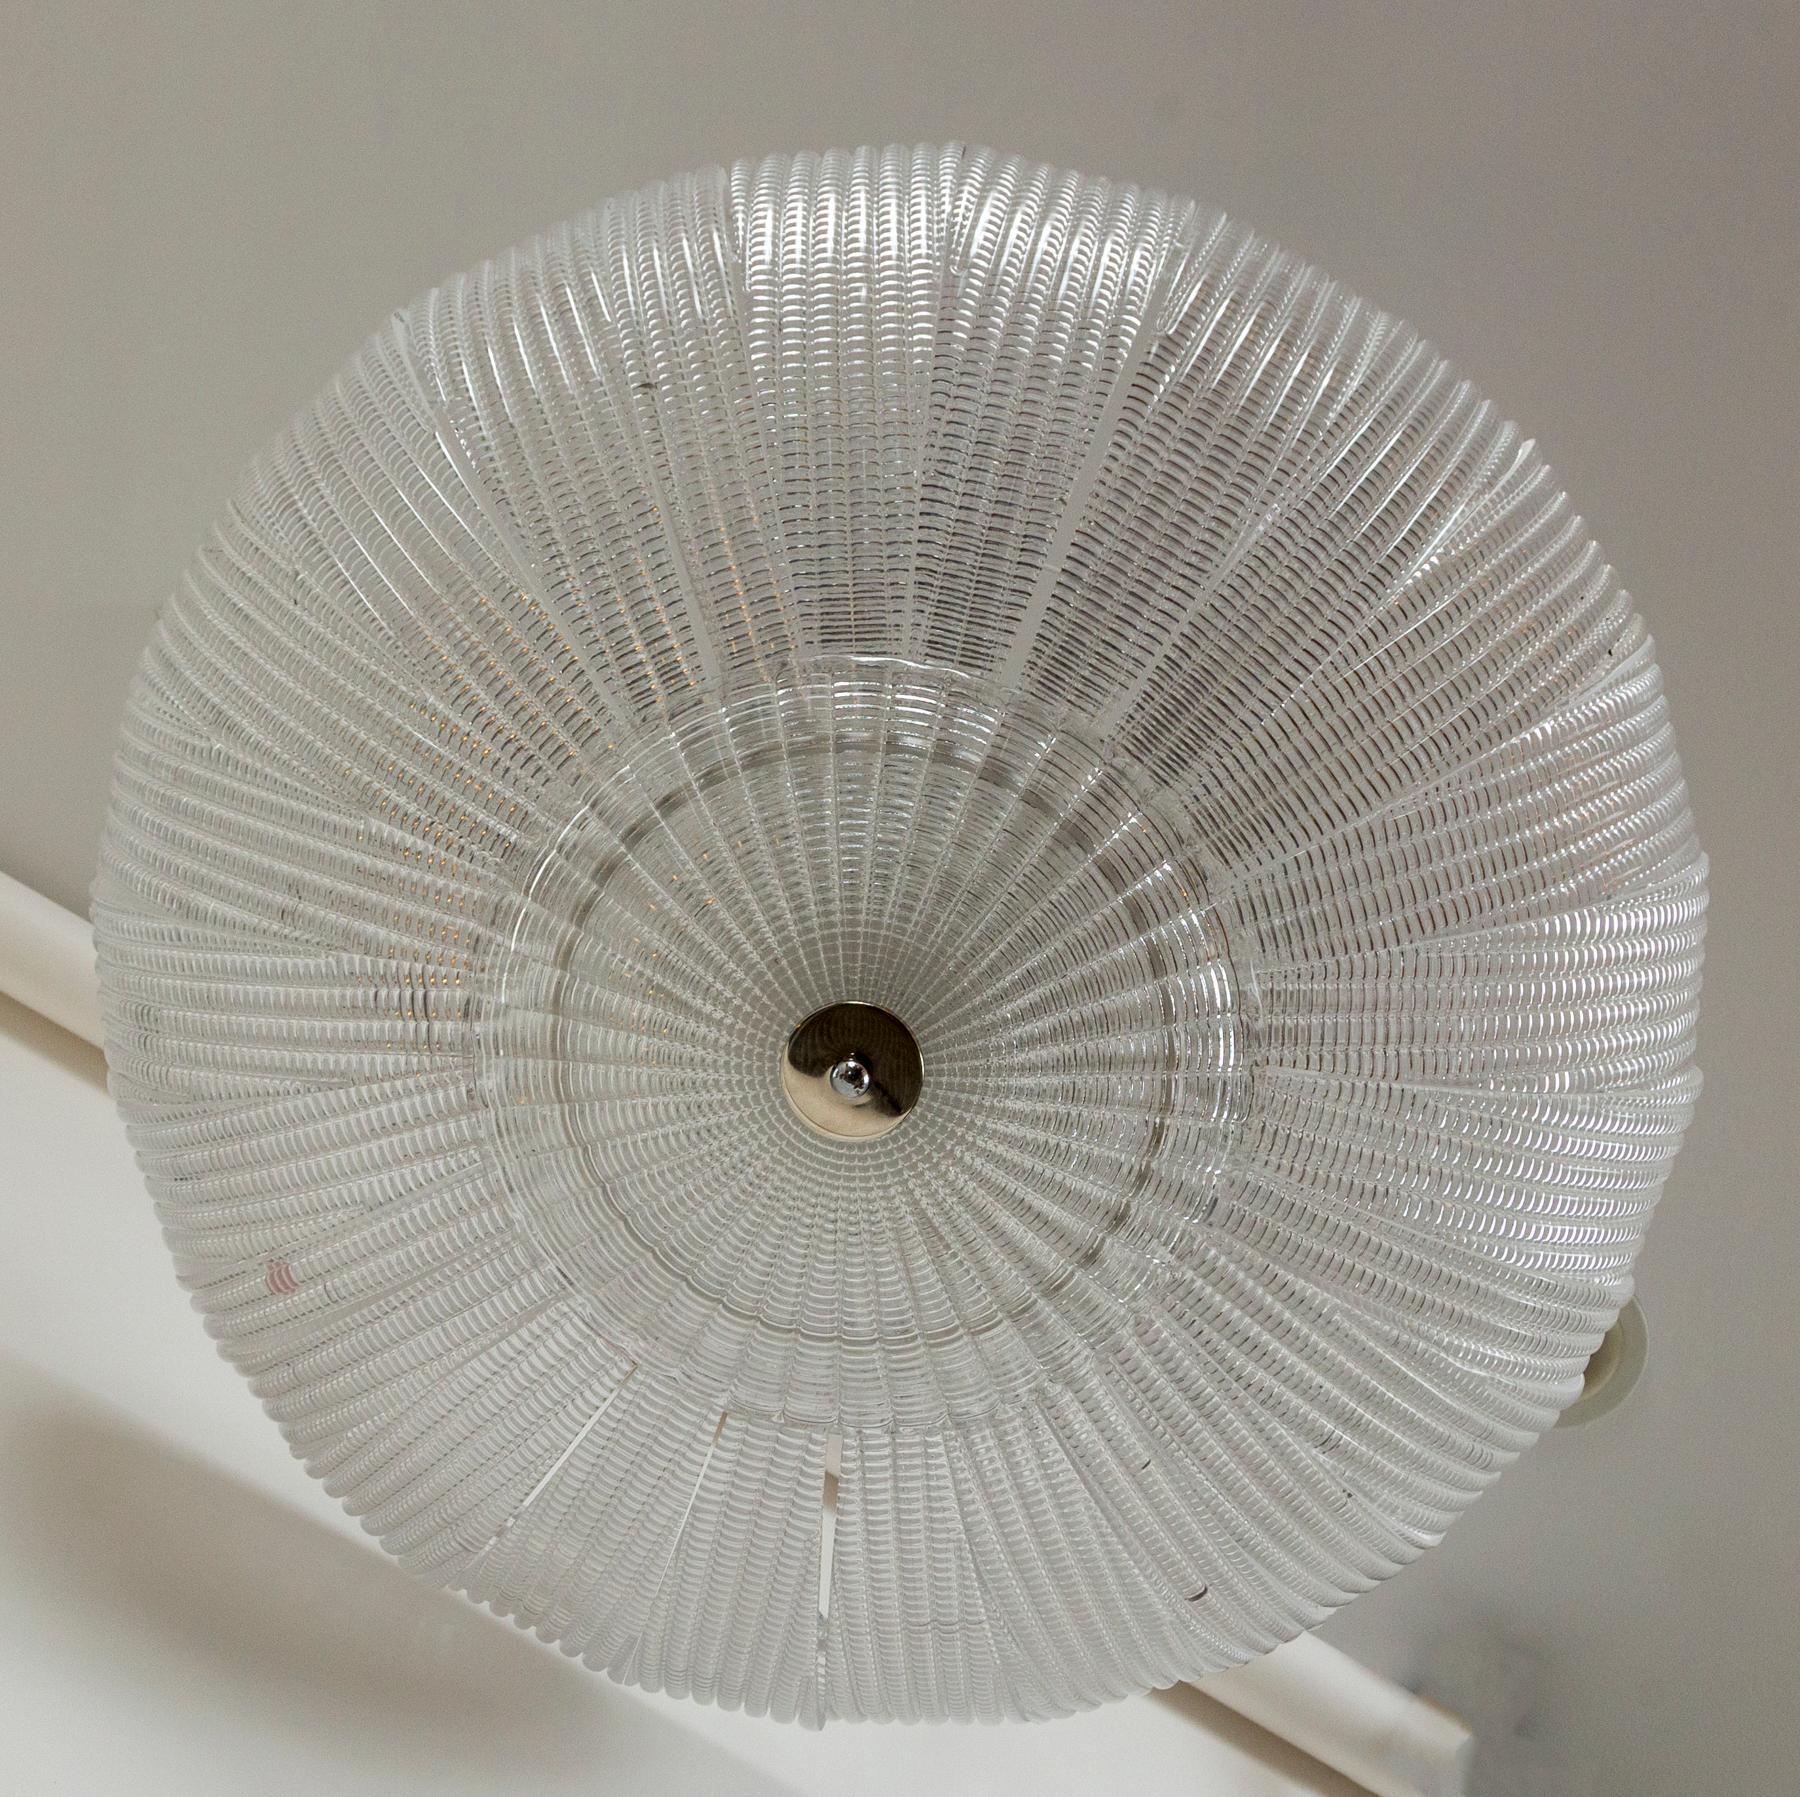 Italian Modern Dome-Shaped Glass Ceiling Fixture, Contemporary For Sale